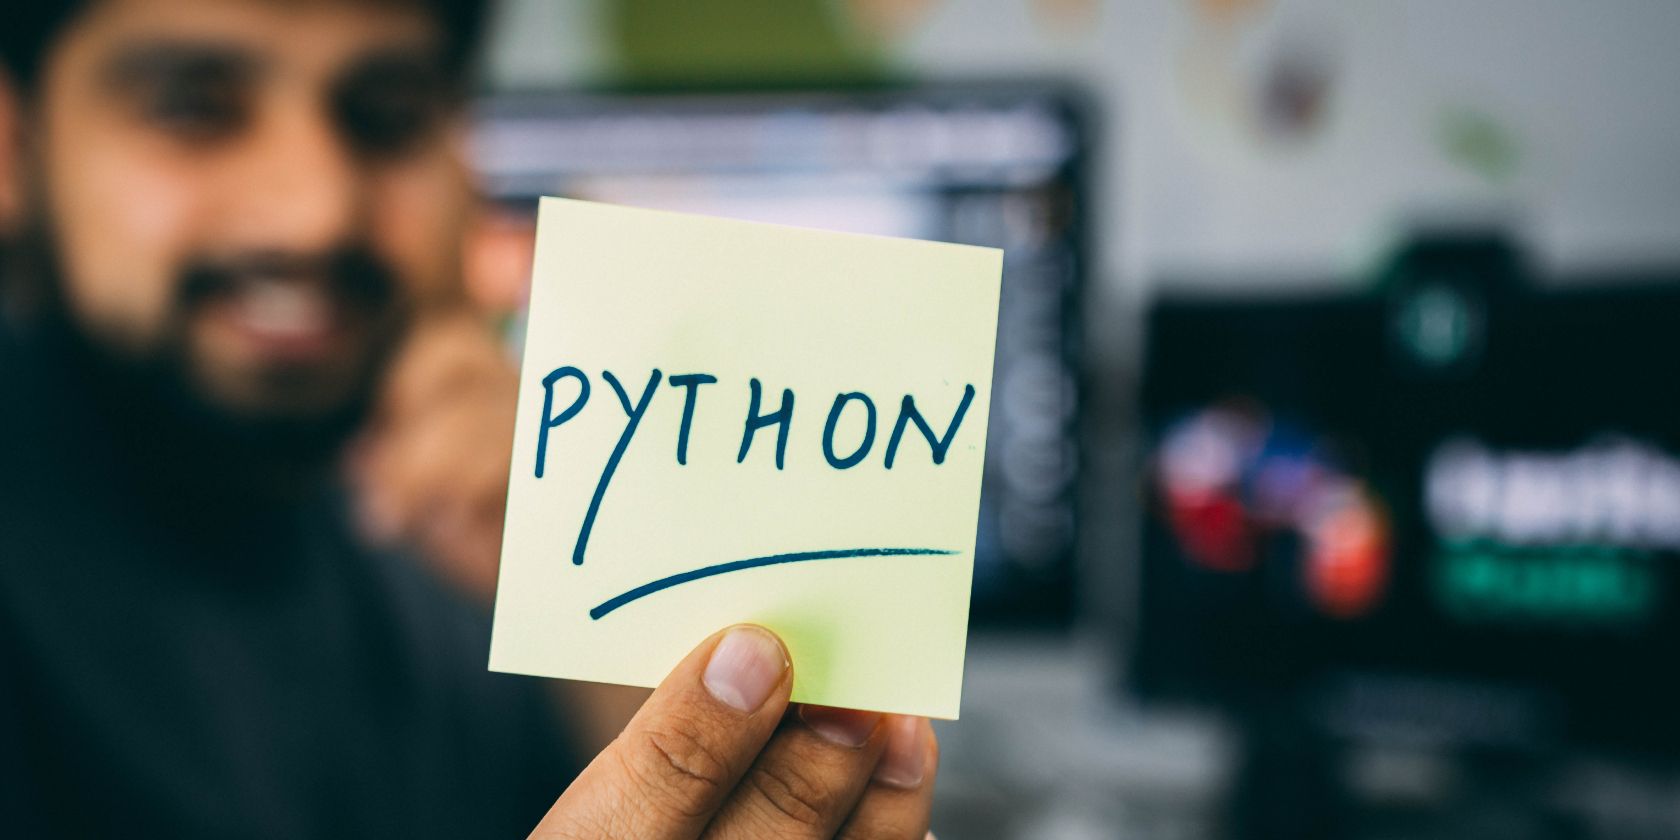 4 Ways to Convert an Integer to a String in Python